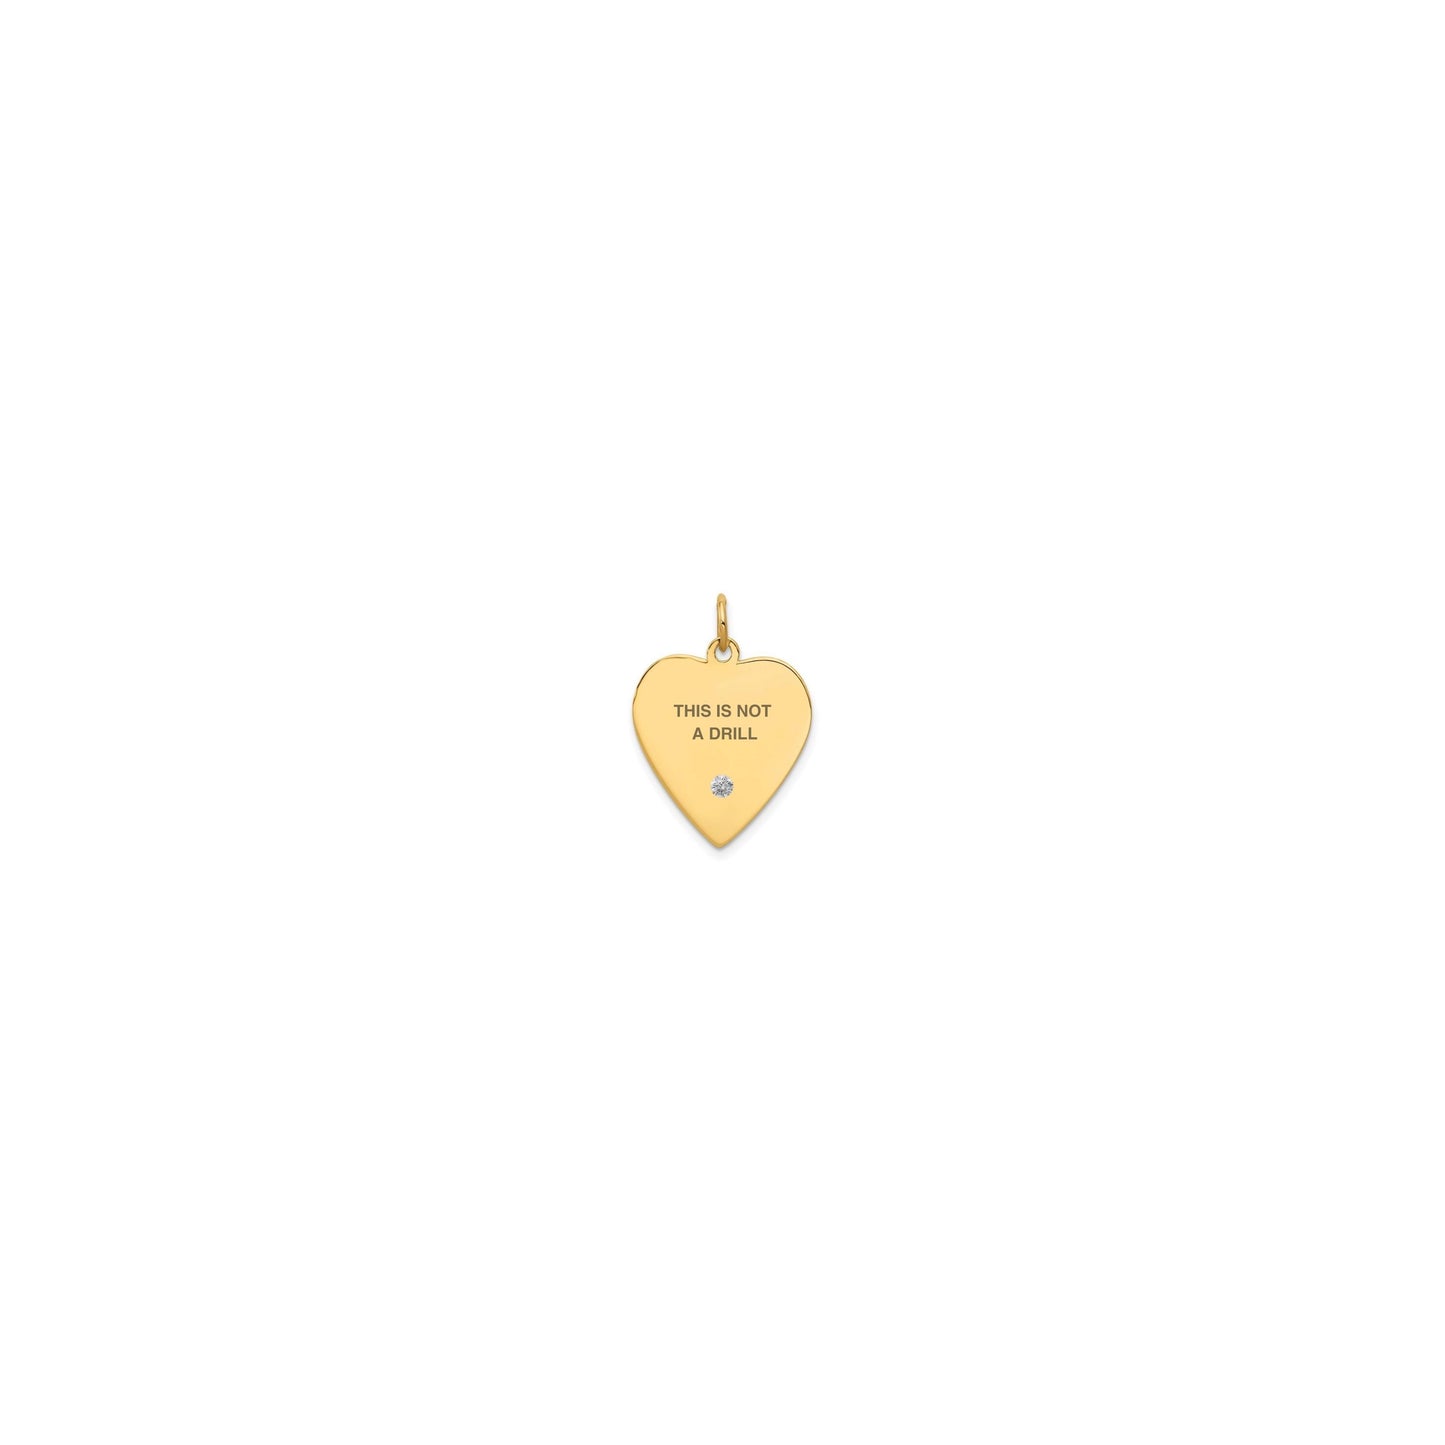 Whole Heart Drill Charm (4 Sizes)